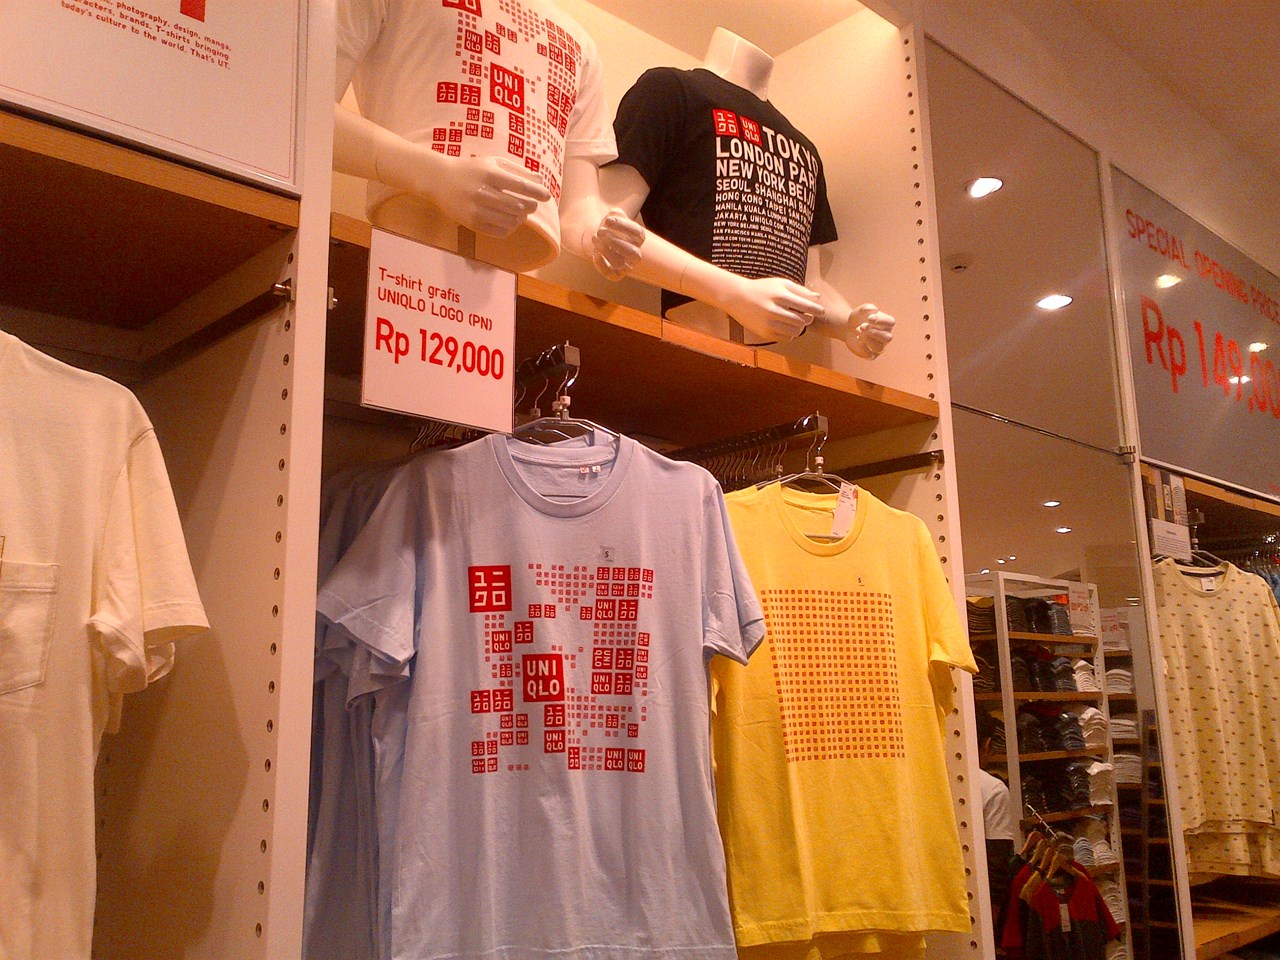 http://www.shintoko.jp/engblog/archives/images/2013/06/130625_uniqloopen02653.jpg